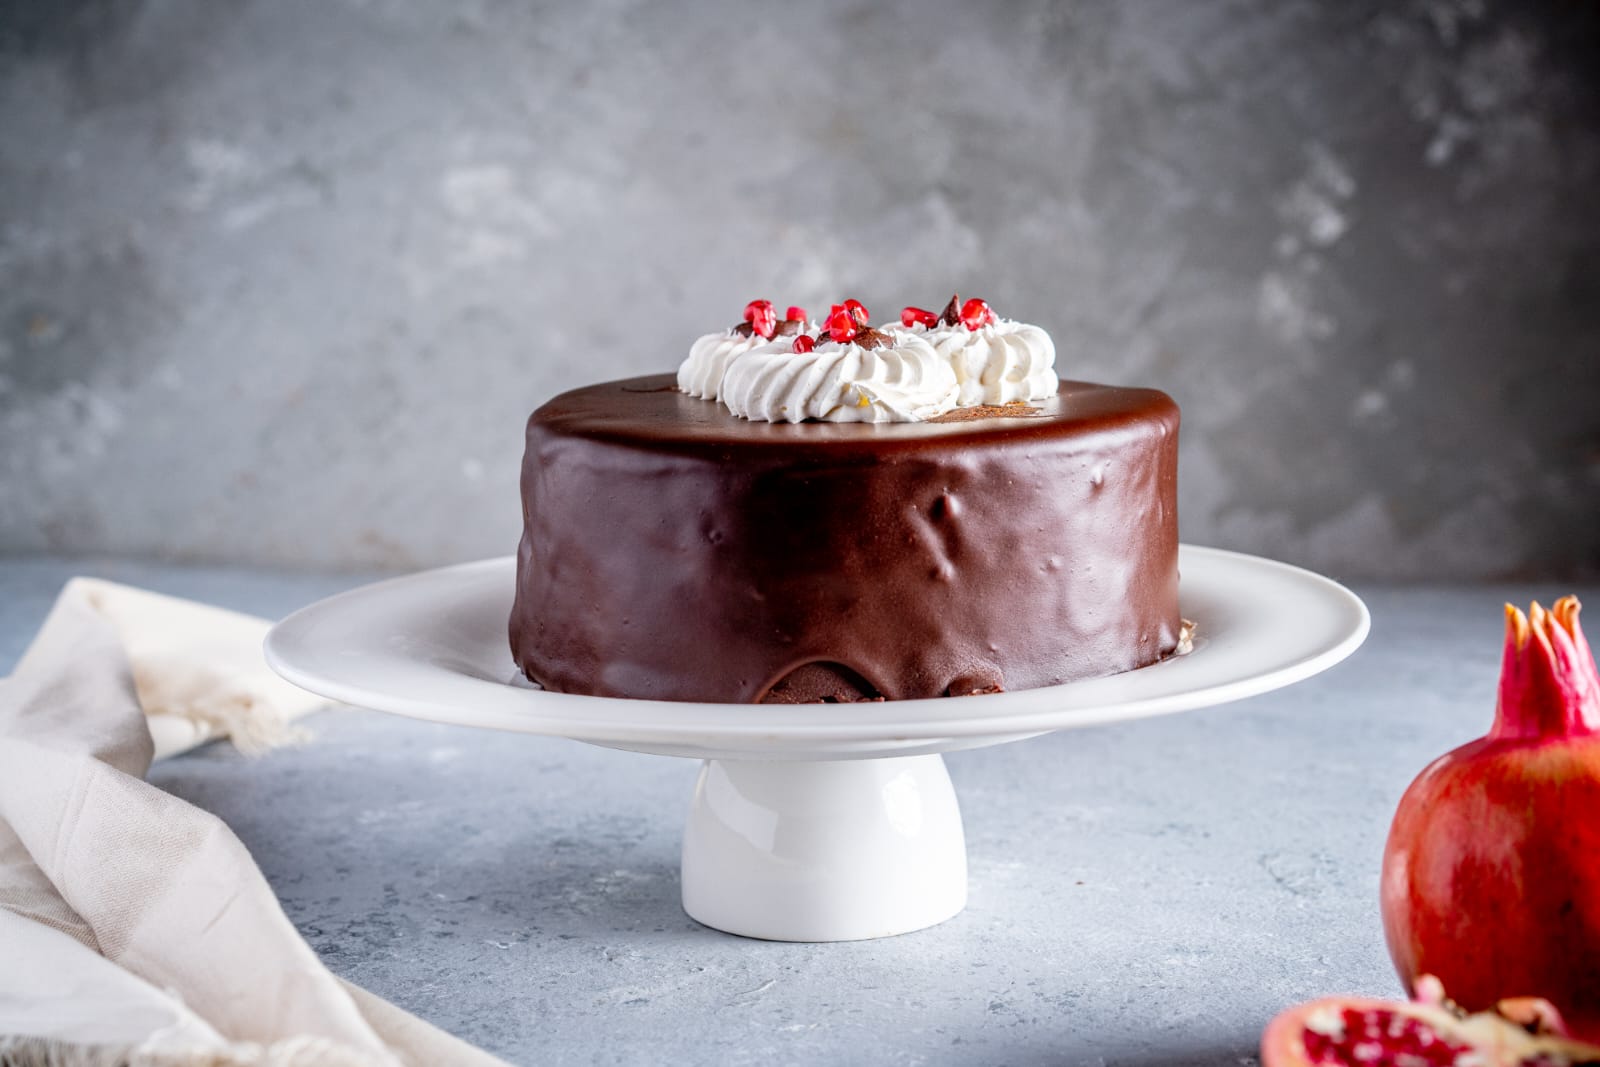 Chocolate mousse and pomegranate cake